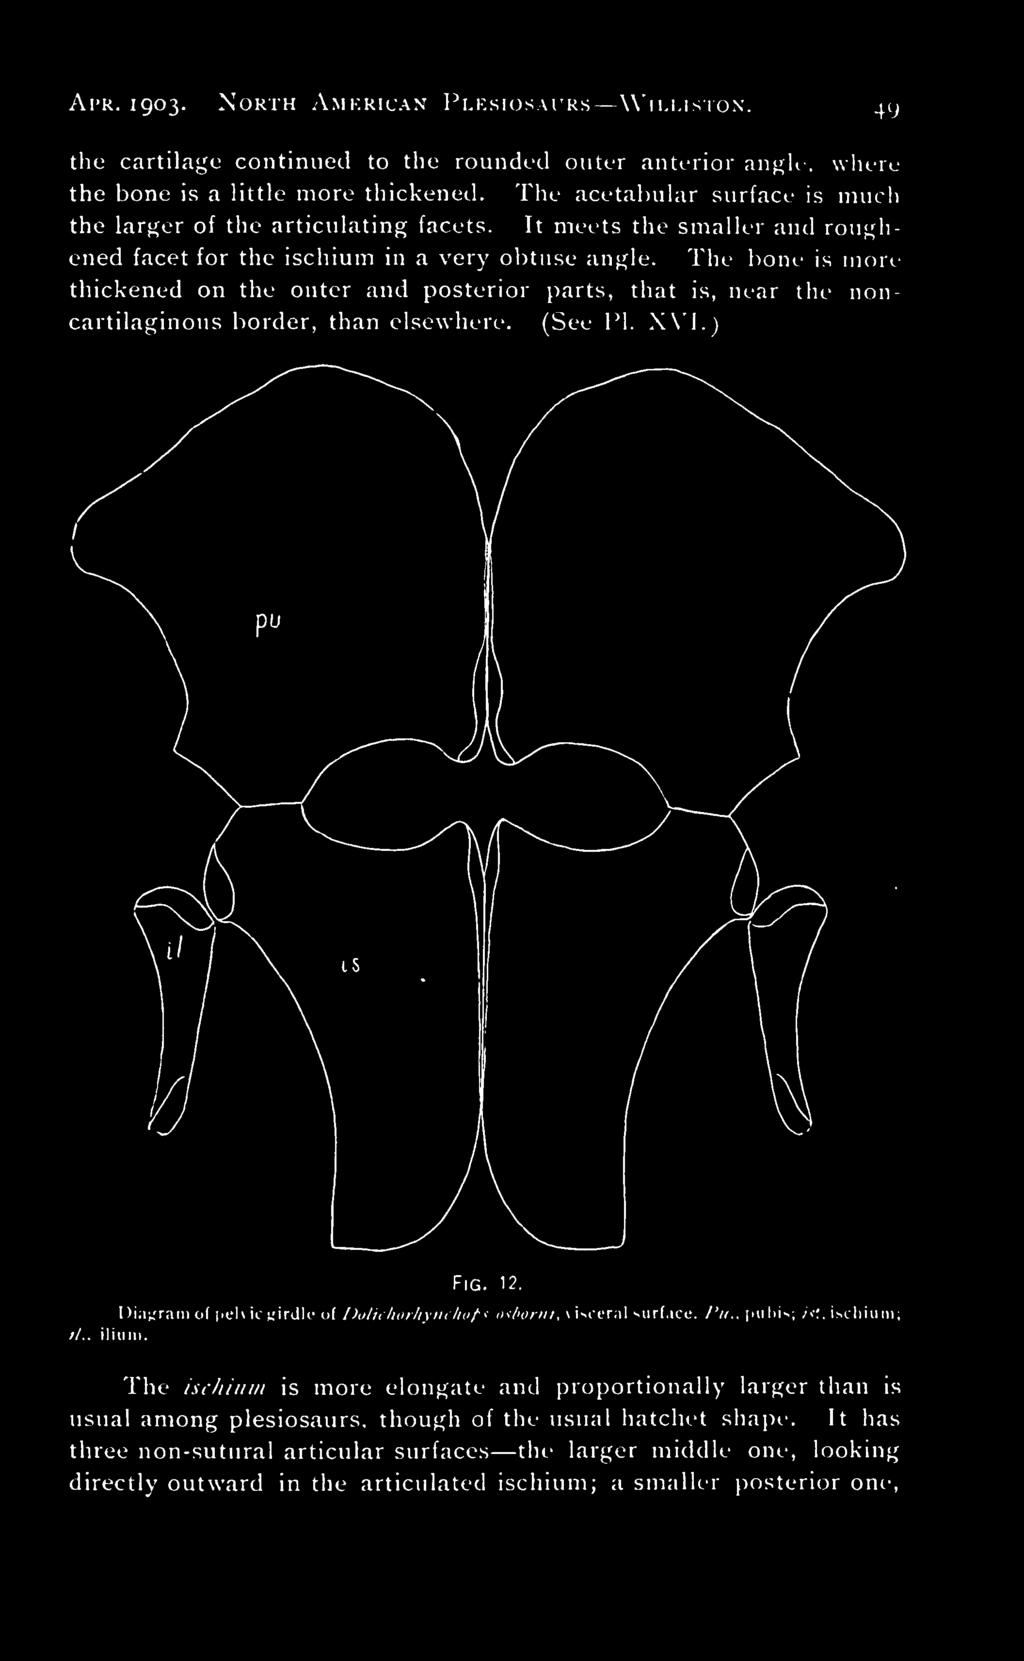 The bone is more thickened on the outer and posterior parts, that is, near the noncartilaginous border, than elsewhere. (See PI. XVI.) Fig. 12.